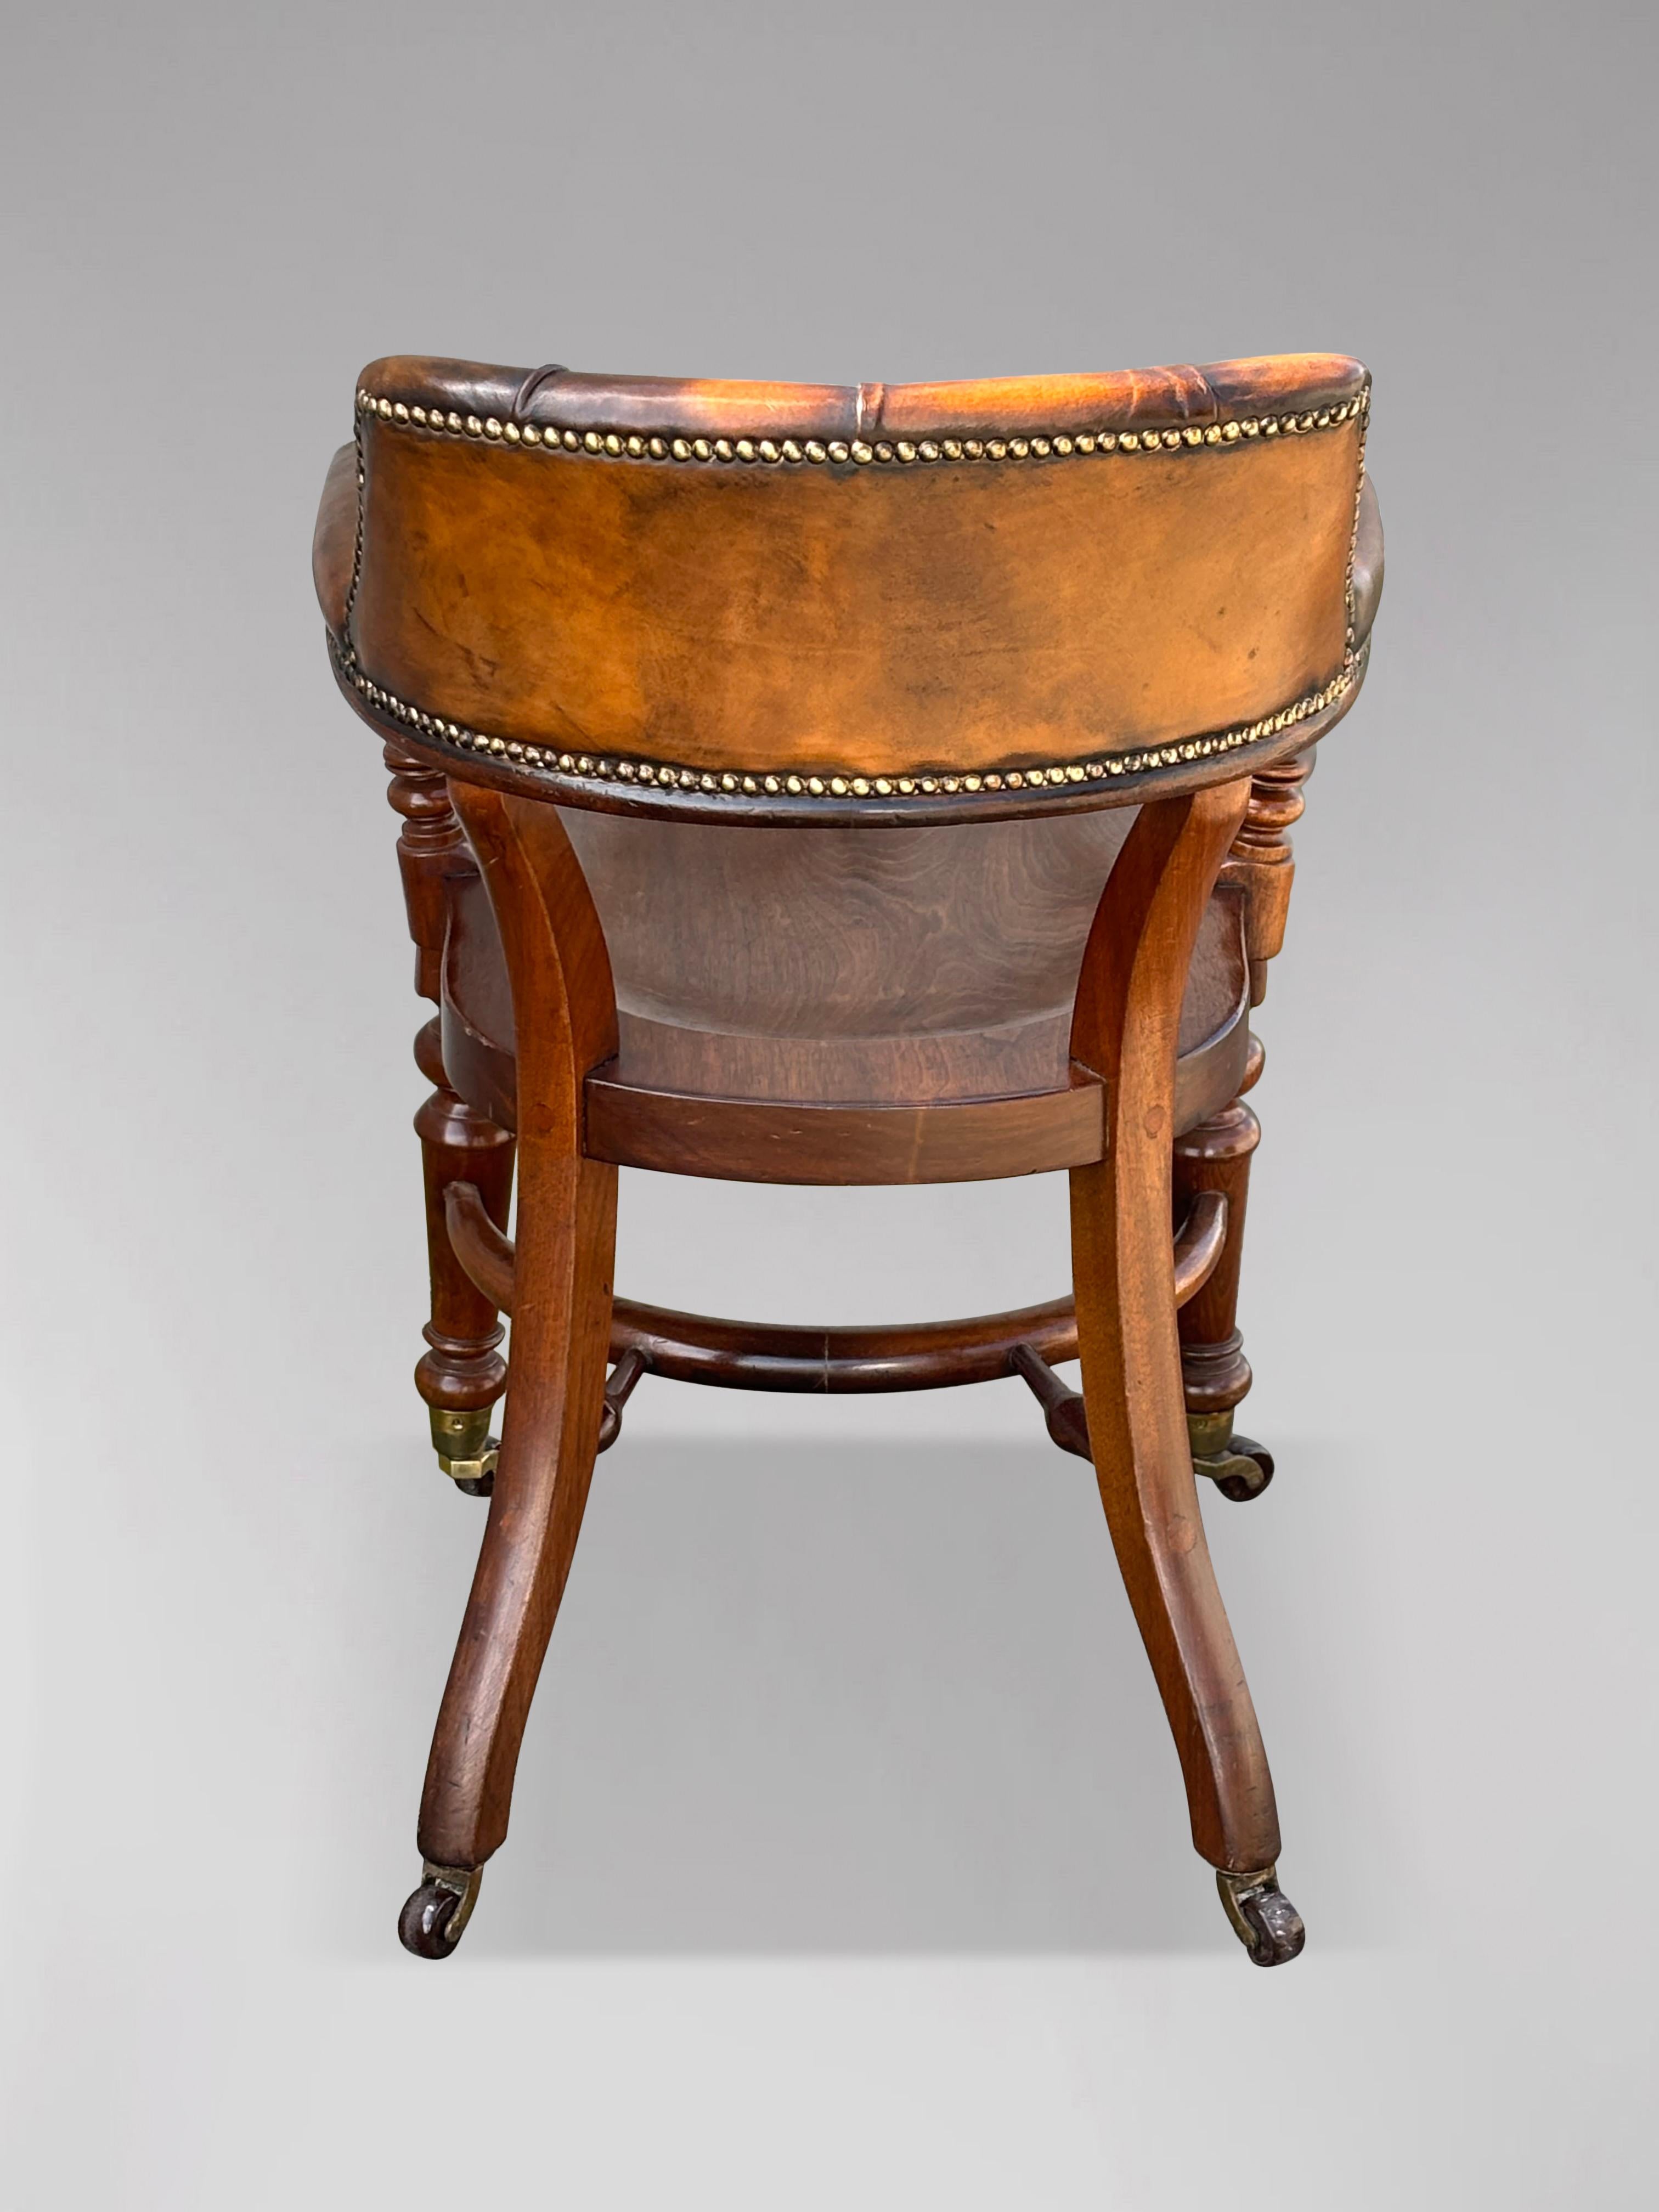 Polished 19th Century Saddle Seat Leather Desk Armchair For Sale